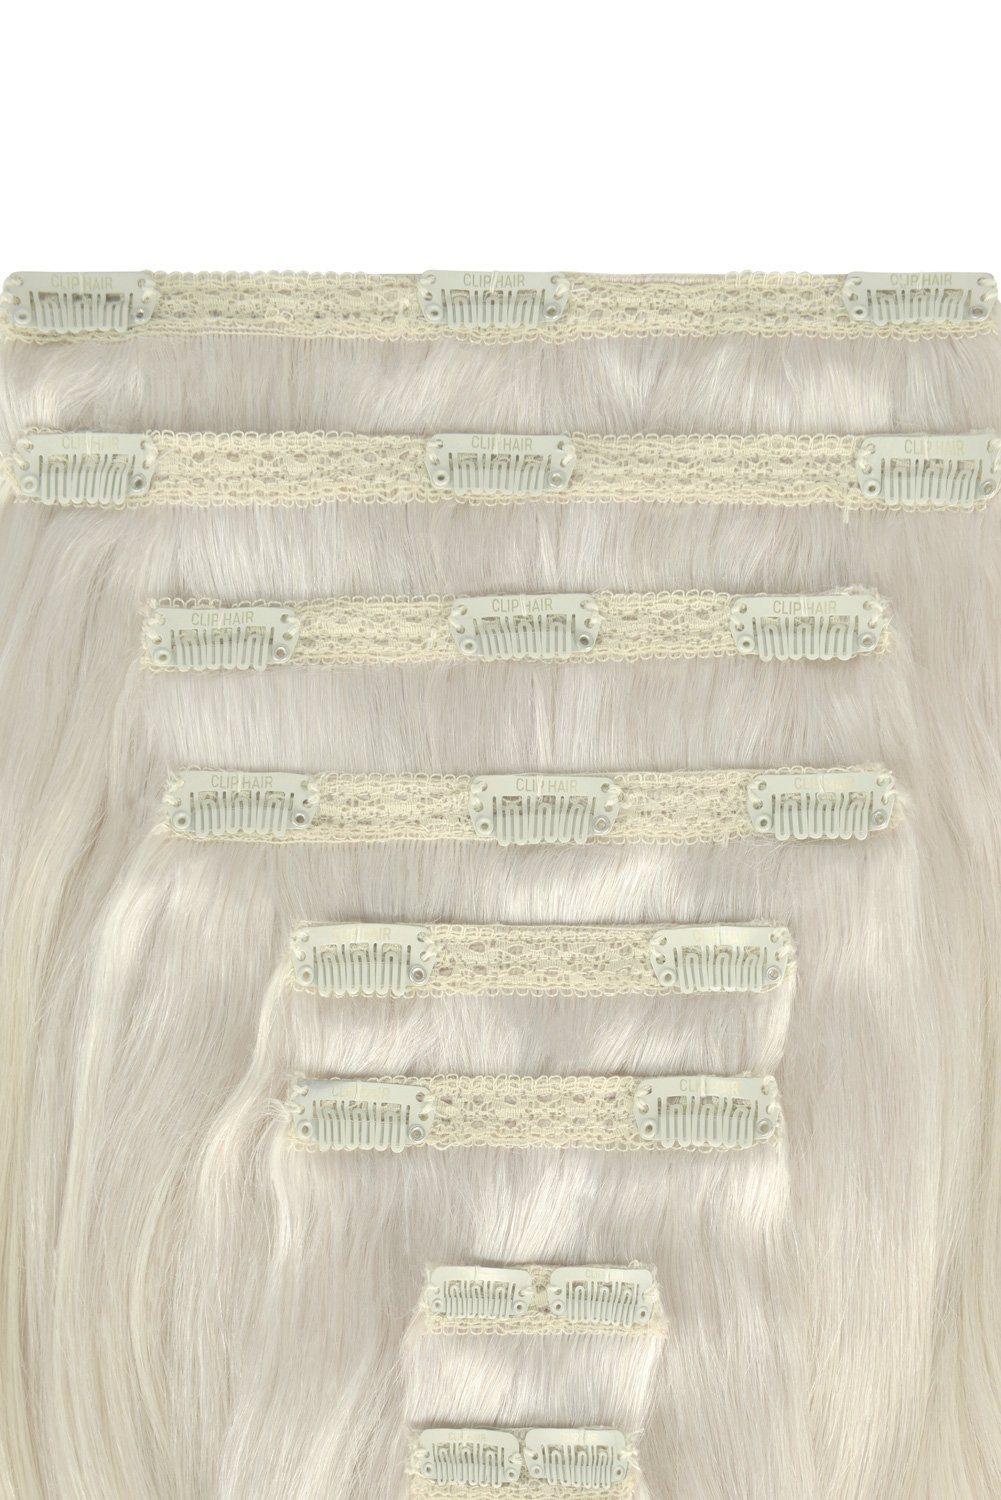 Double Wefted Full Head Remy Clip in Human Hair Extensions - Ice Blonde Double wefted full head cliphair 